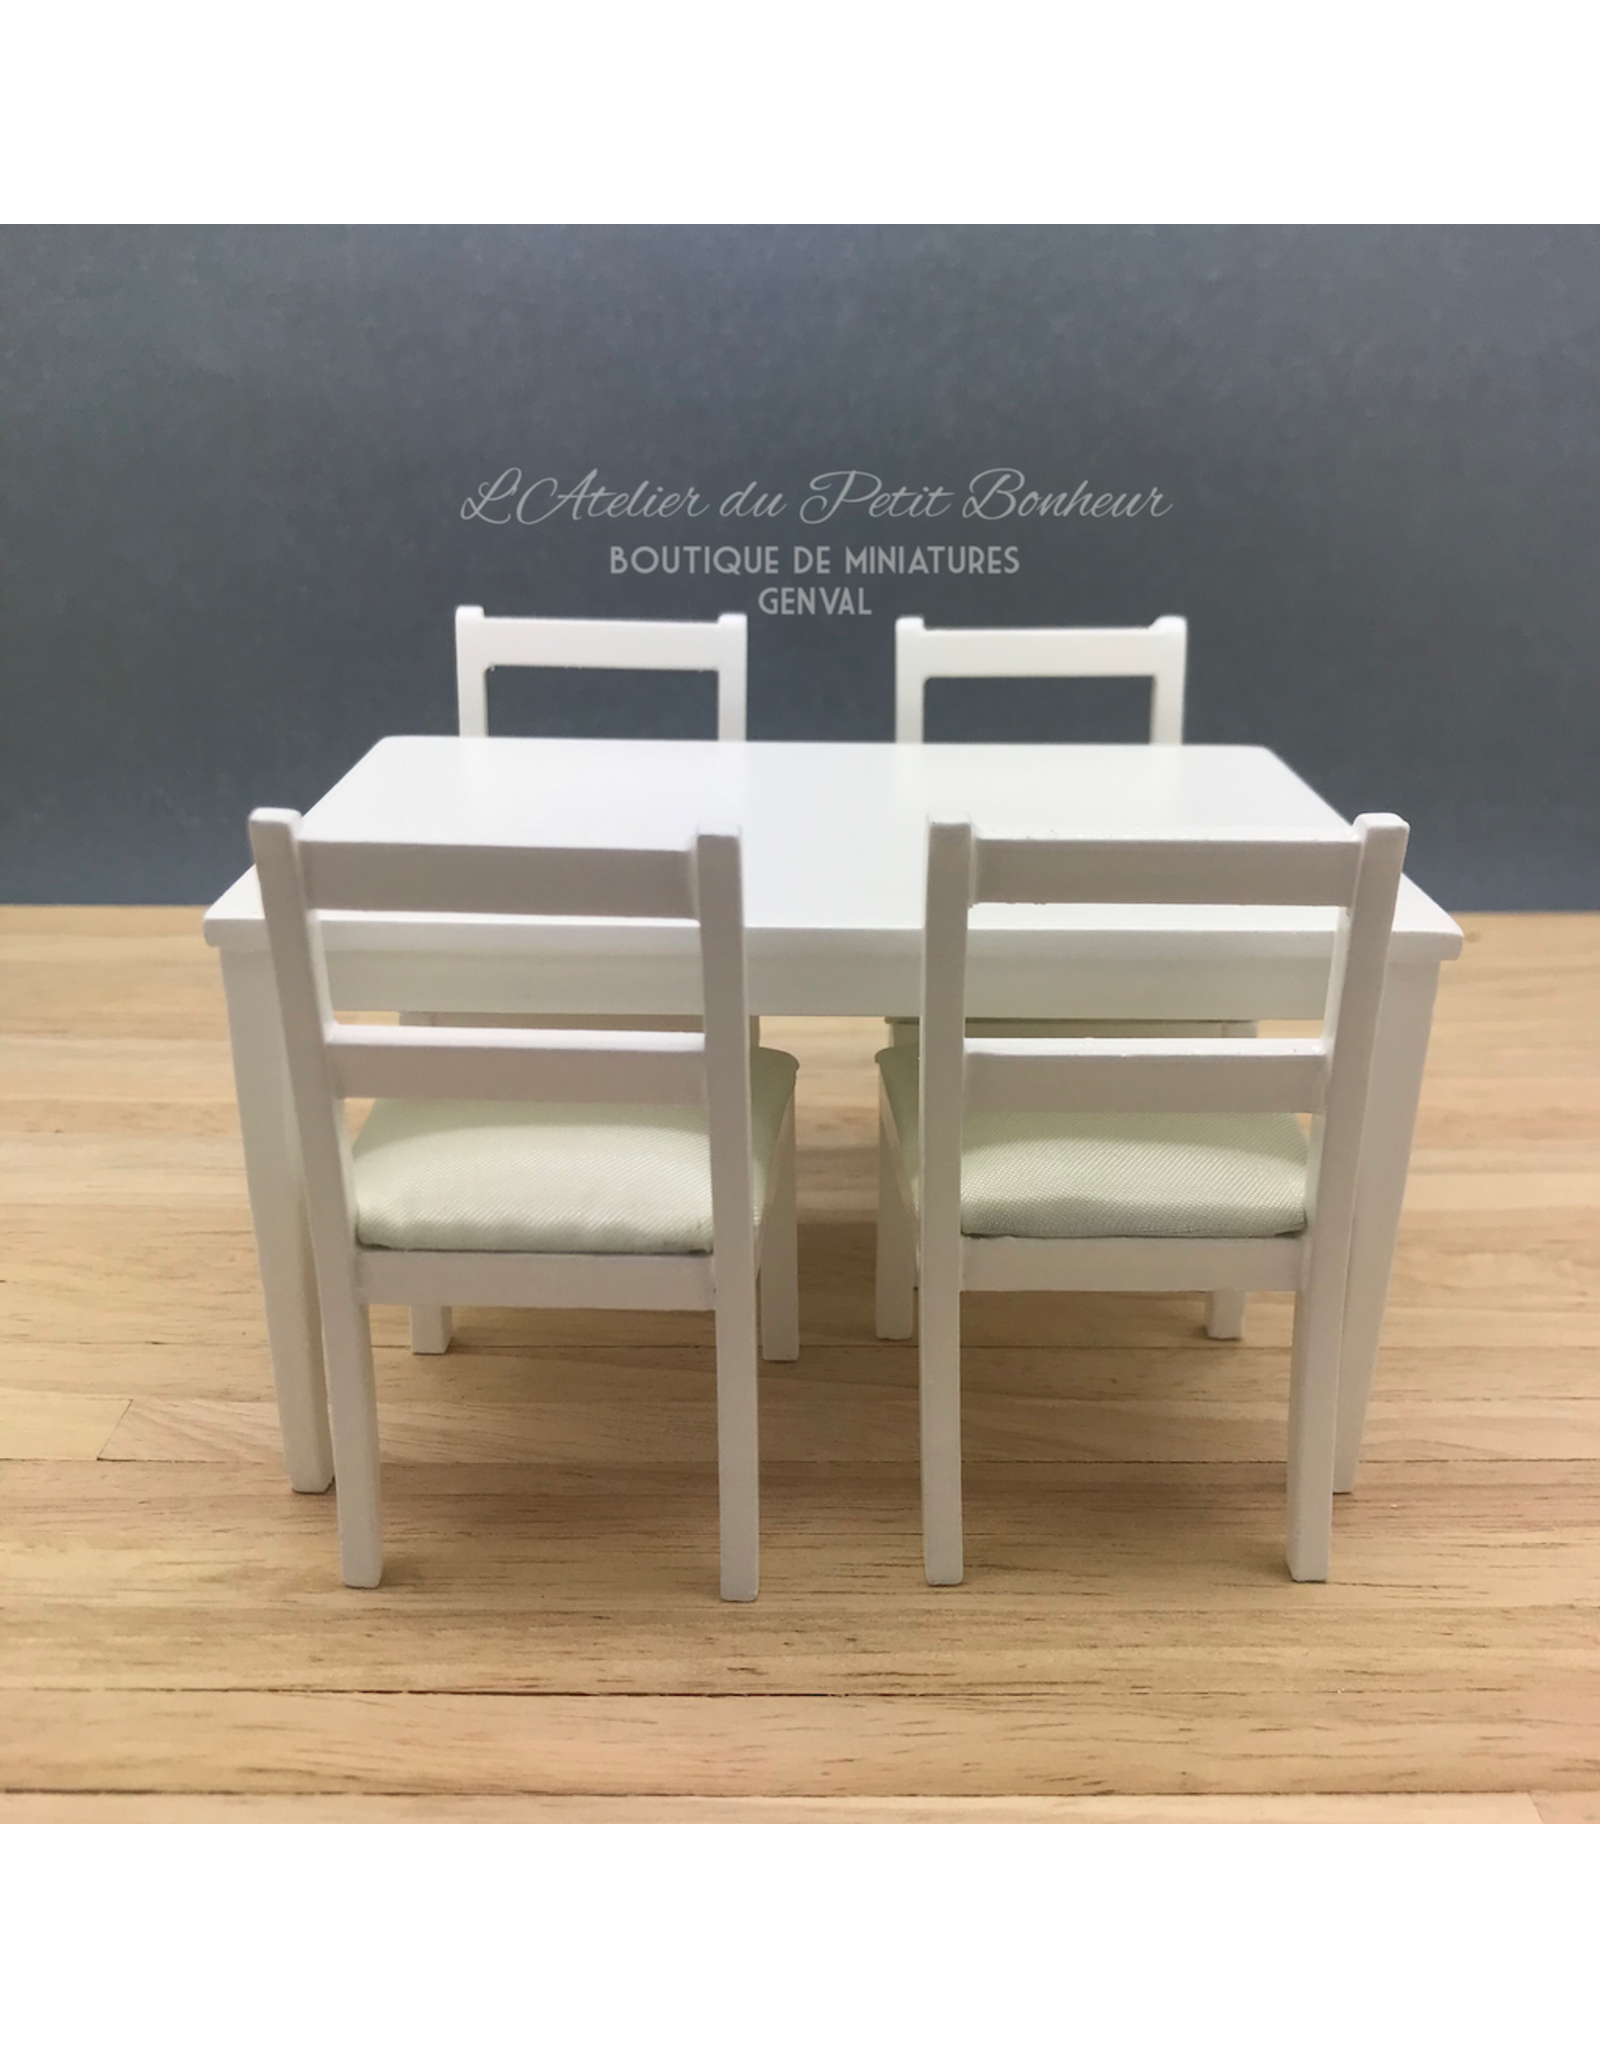 Table blanche moderne & 4 chaises miniatures 1:12